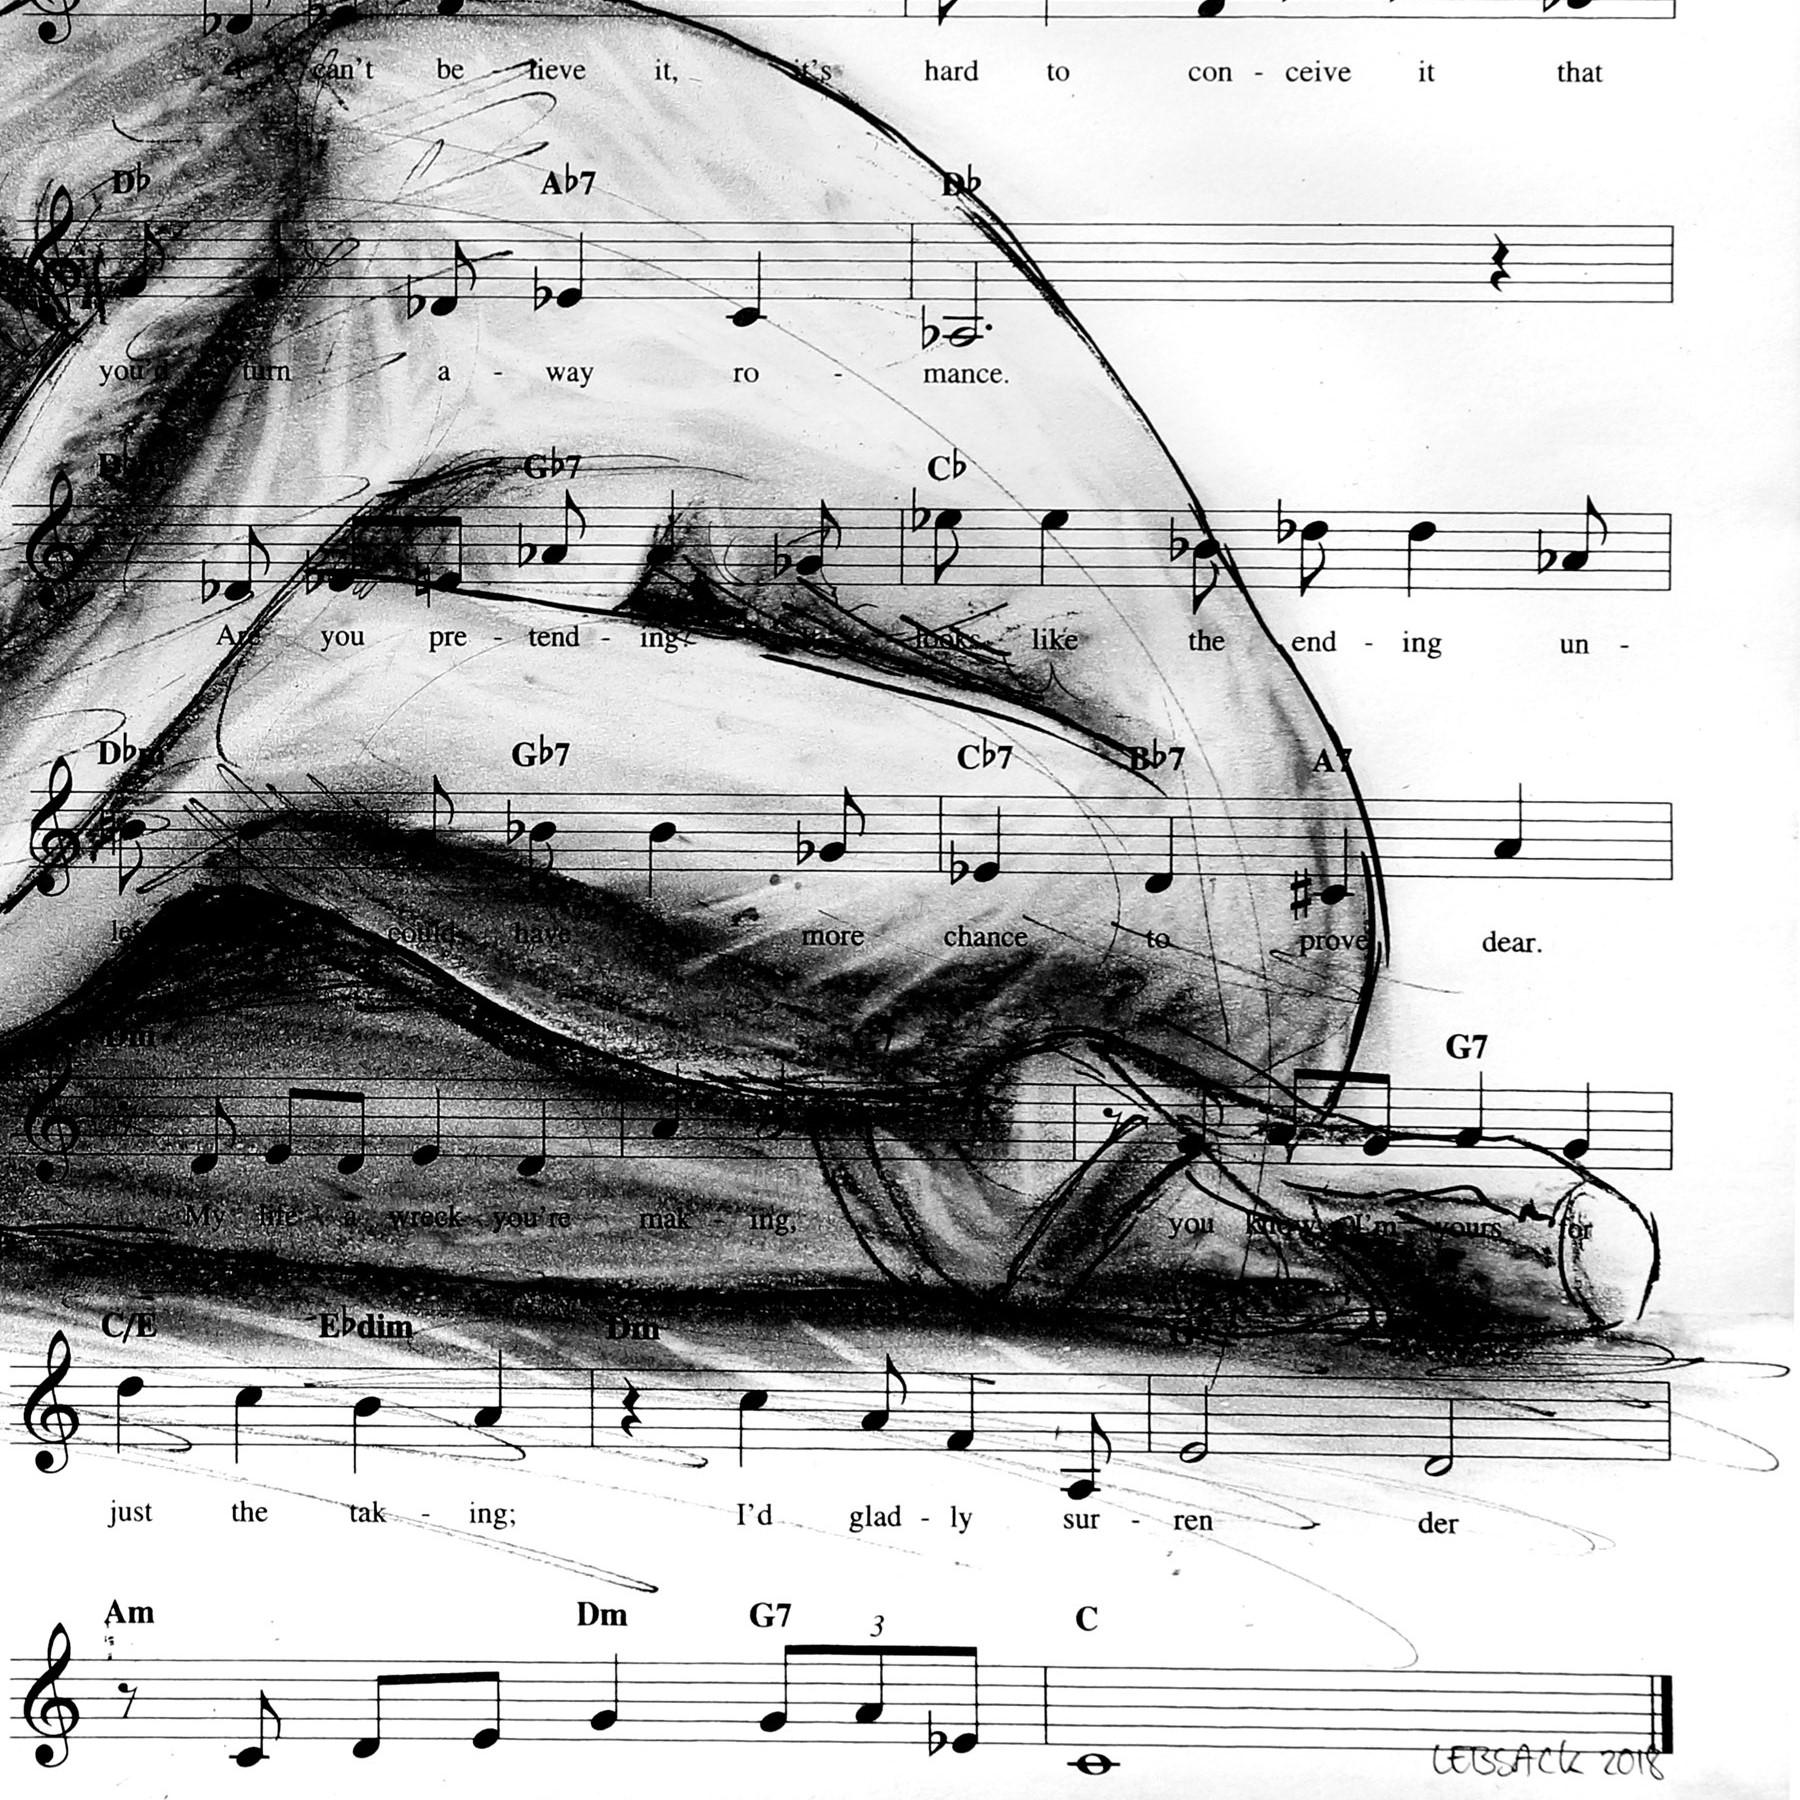 Robert Lebsack created this one-of-a-kind 11 inch tall by 17 inch wide artwork with charcoal and ink on sheet music. His imagery is hand drawn with great detail. This artwork is signed by the artist in the lower right corner. Convenient shipping